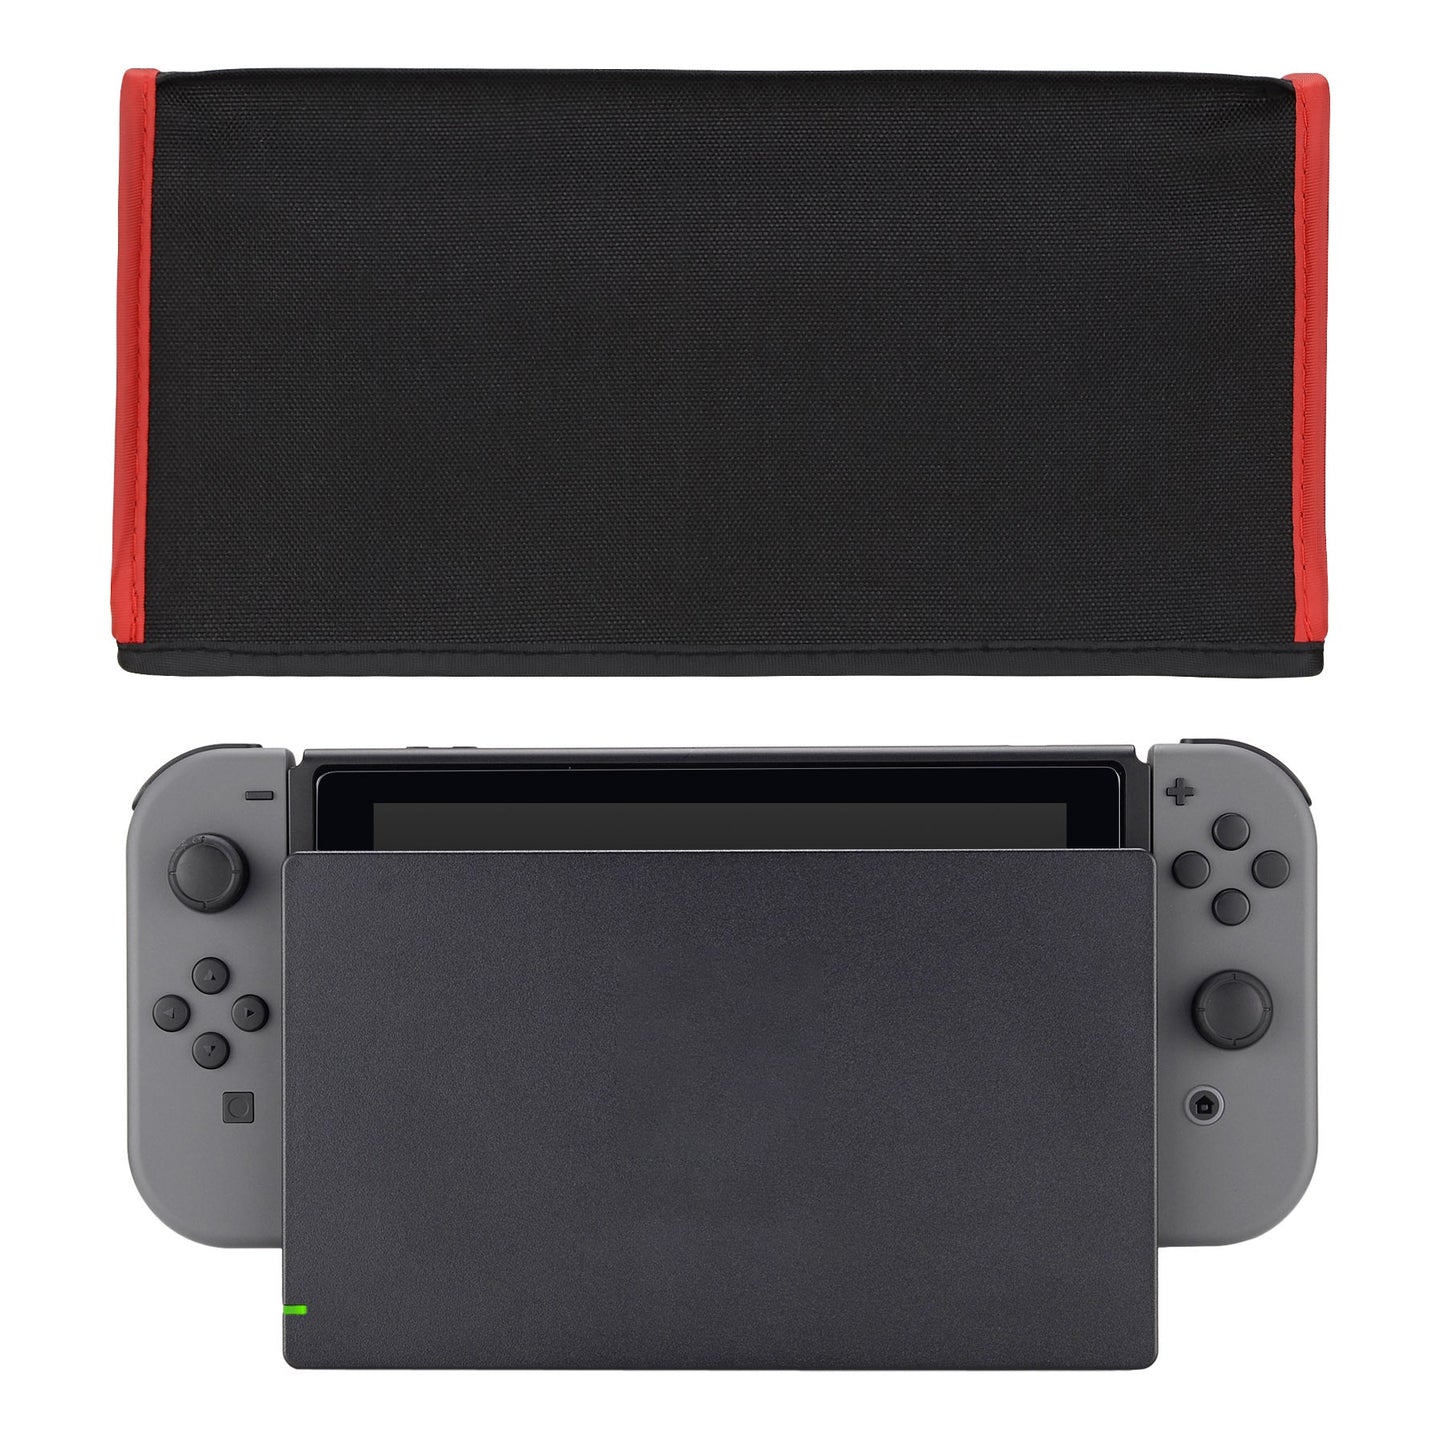 PlayVital Black & Red Trim Nylon Dust Cover, Soft Neat Lining Dust Guard, Anti Scratch Waterproof Cover Sleeve for NS & Switch OLED Charging Dock - NTA8003 PlayVital